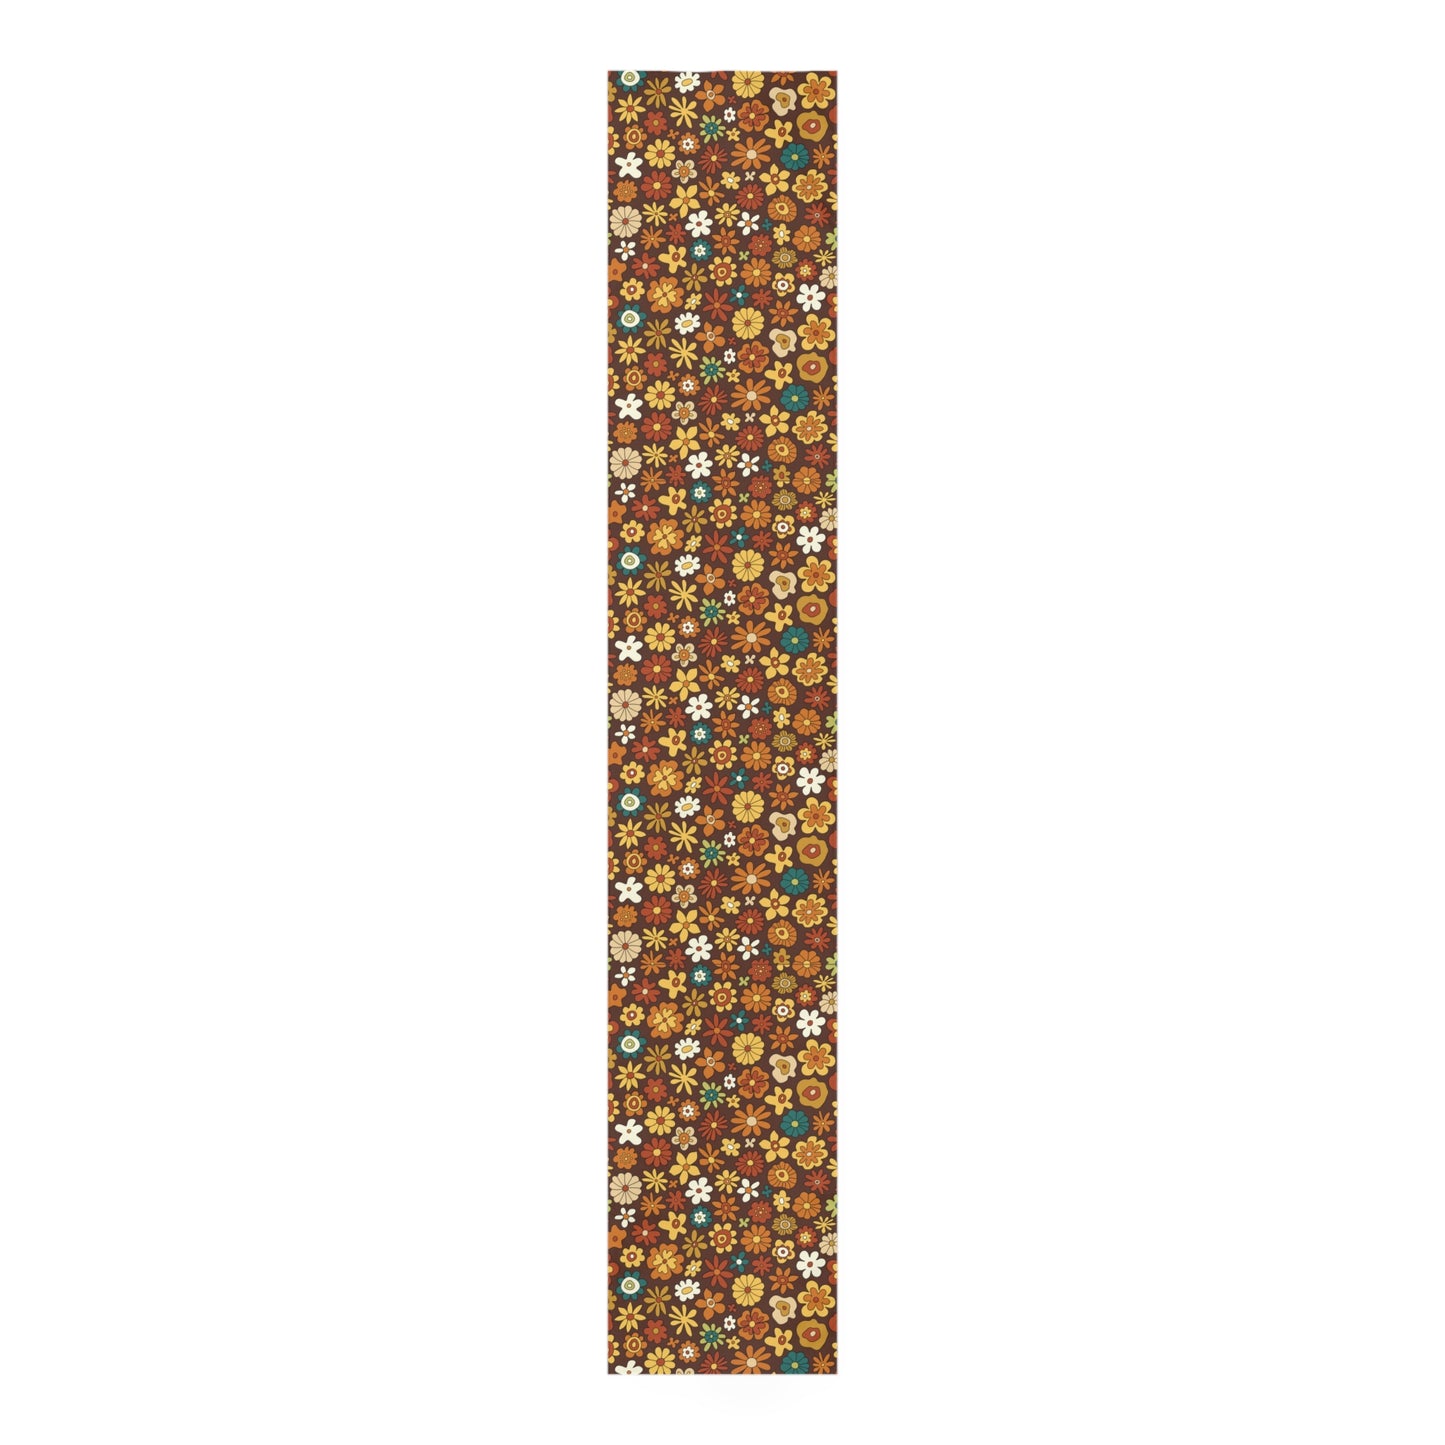 Retro 60s 70s Groovy Floral Mid Century Modern Brown Table Runner